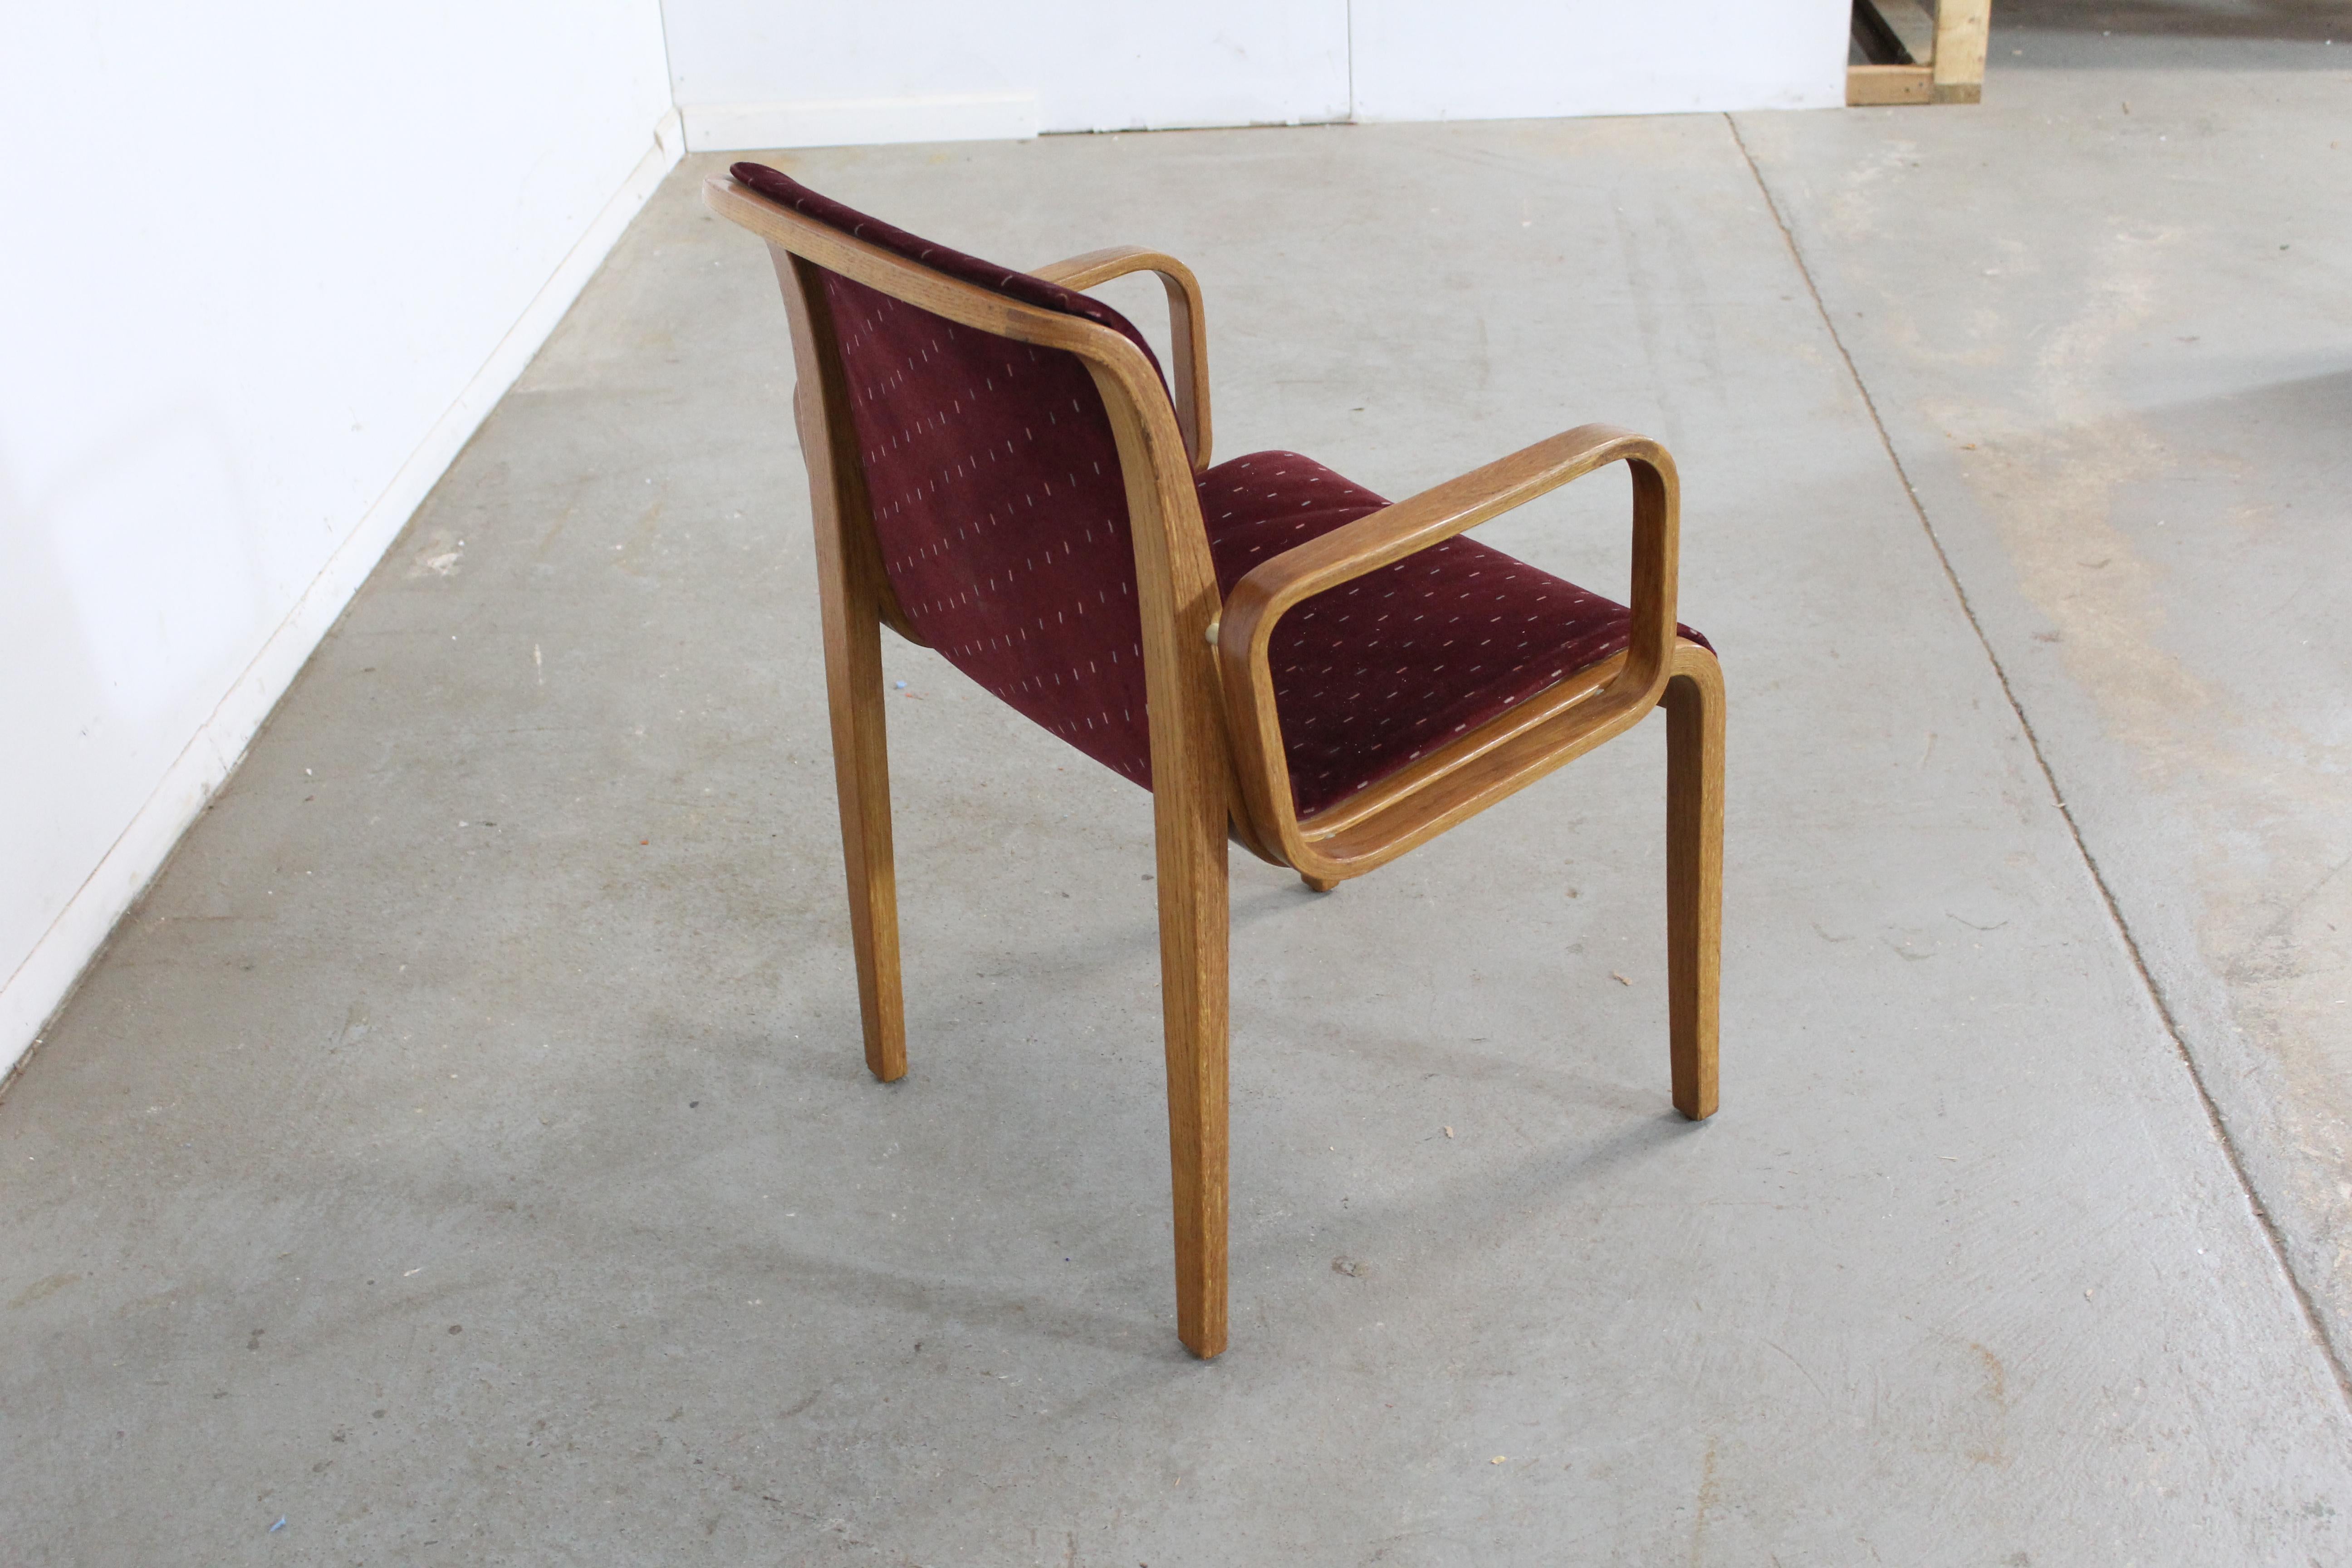 North American Mid-Century Modern Bill Stephens Knoll Arm Chair For Sale